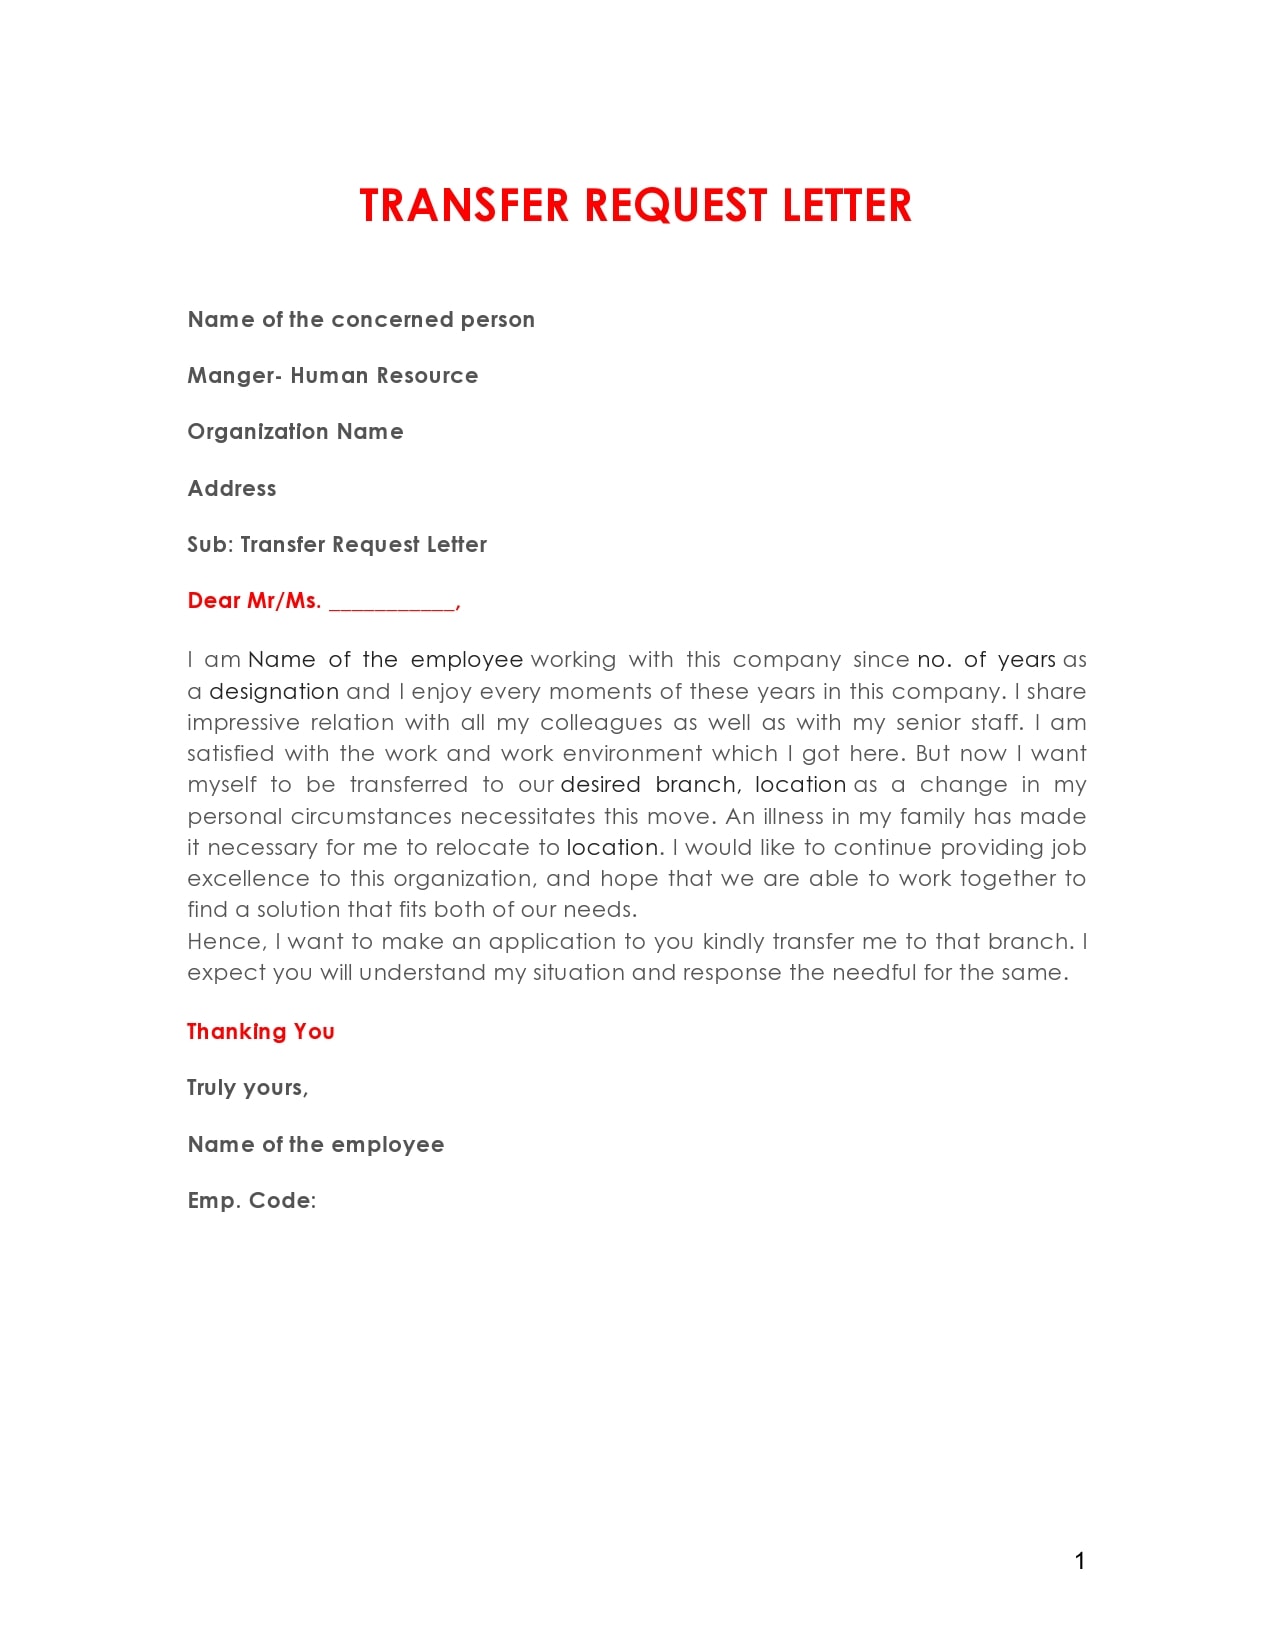 30 Professional Transferring Letters Job And School Templatearchive